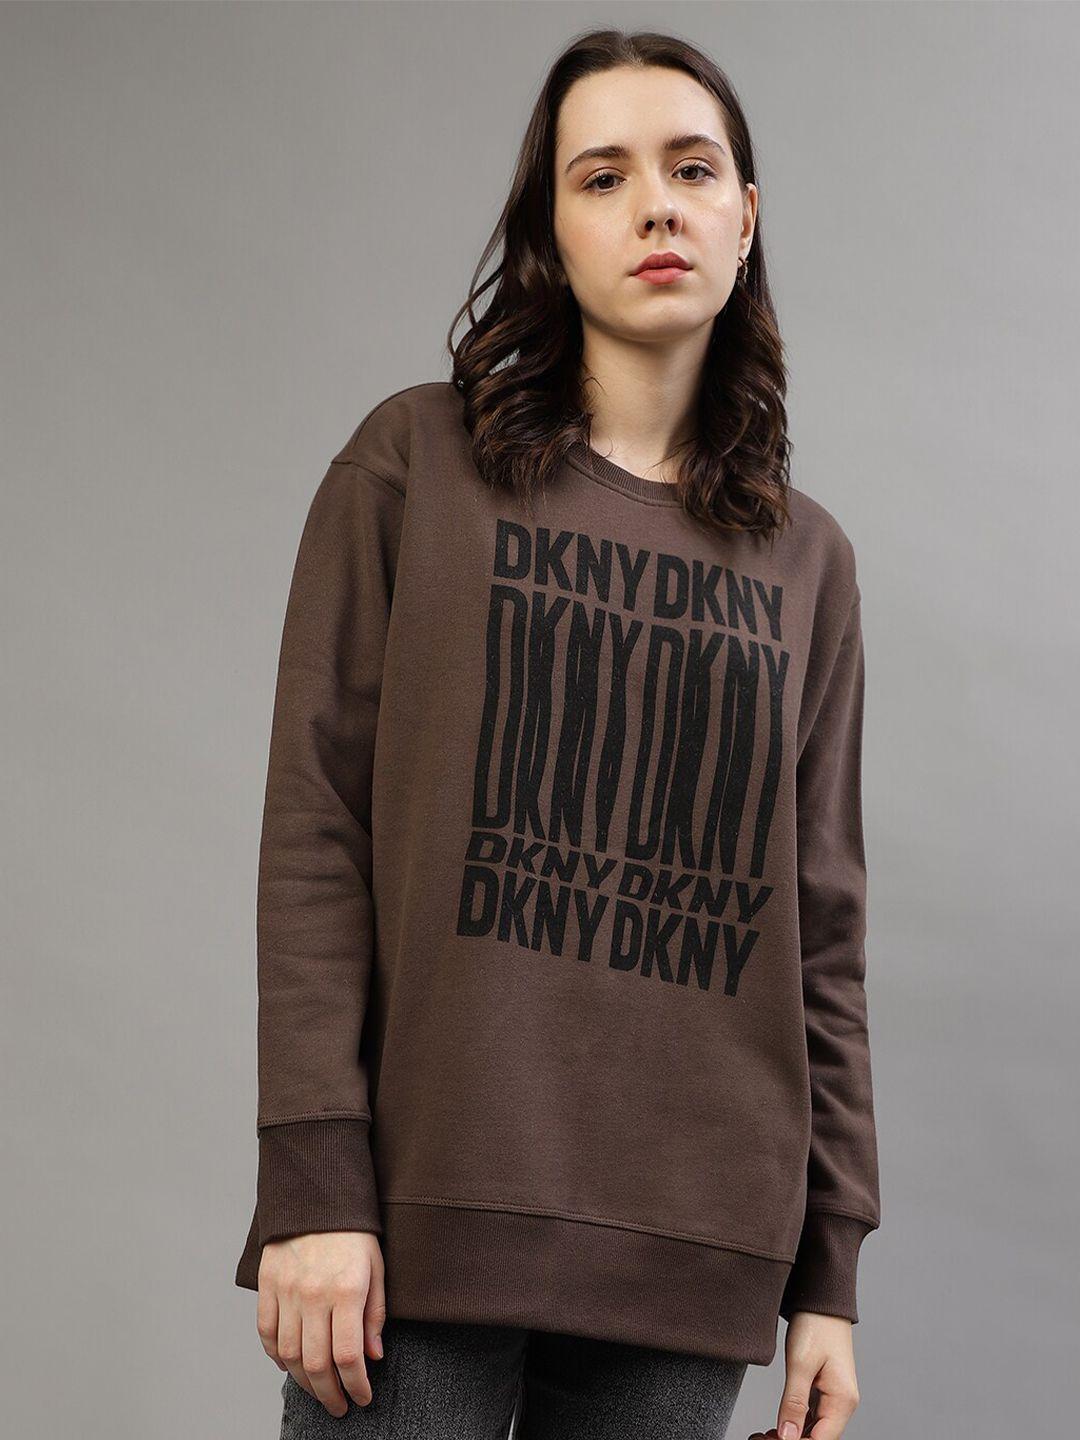 dkny typography printed round neck long sleeves pullover sweatshirt